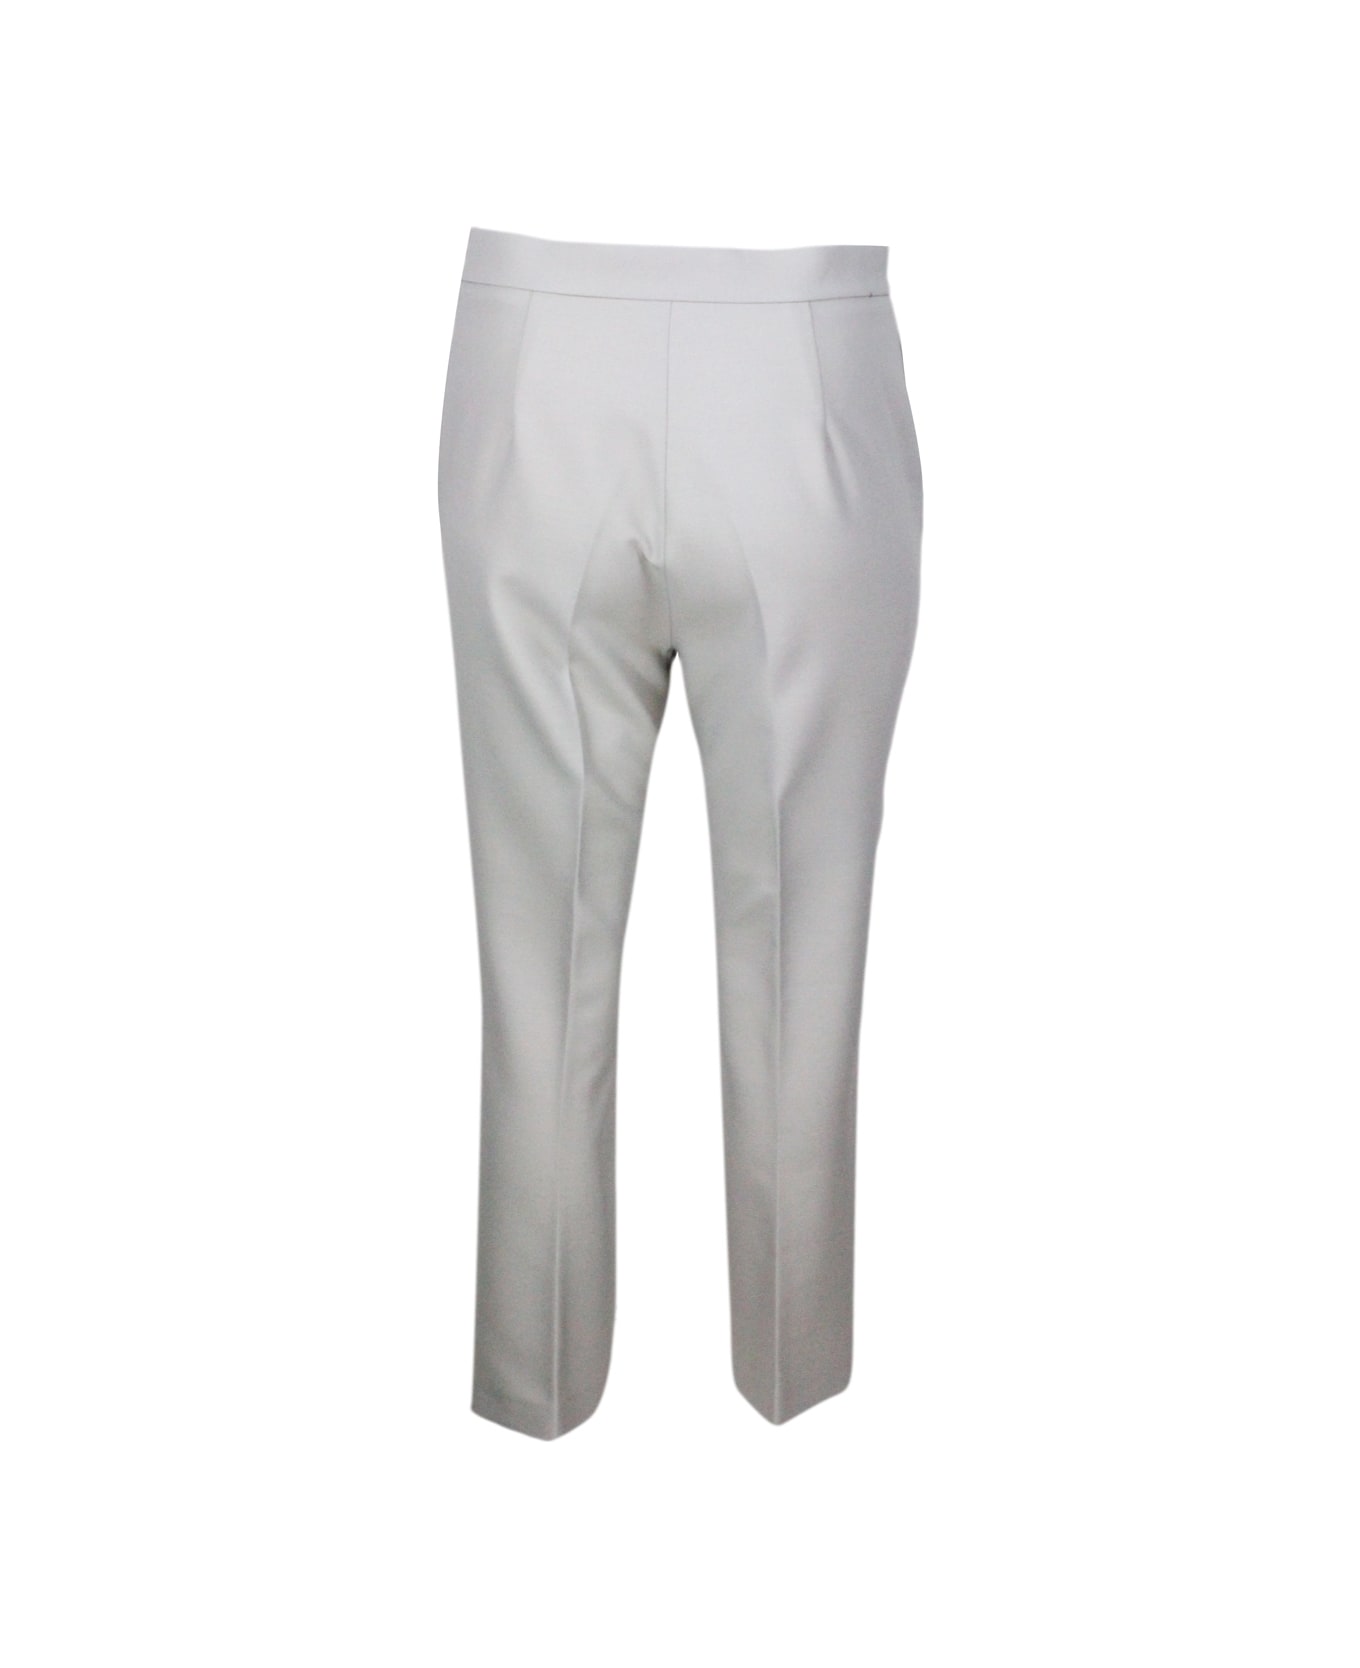 Fabiana Filippi Trousers In Thick Wool Blend Fabric With A Soft Line And Side Zip Fastening - Ice